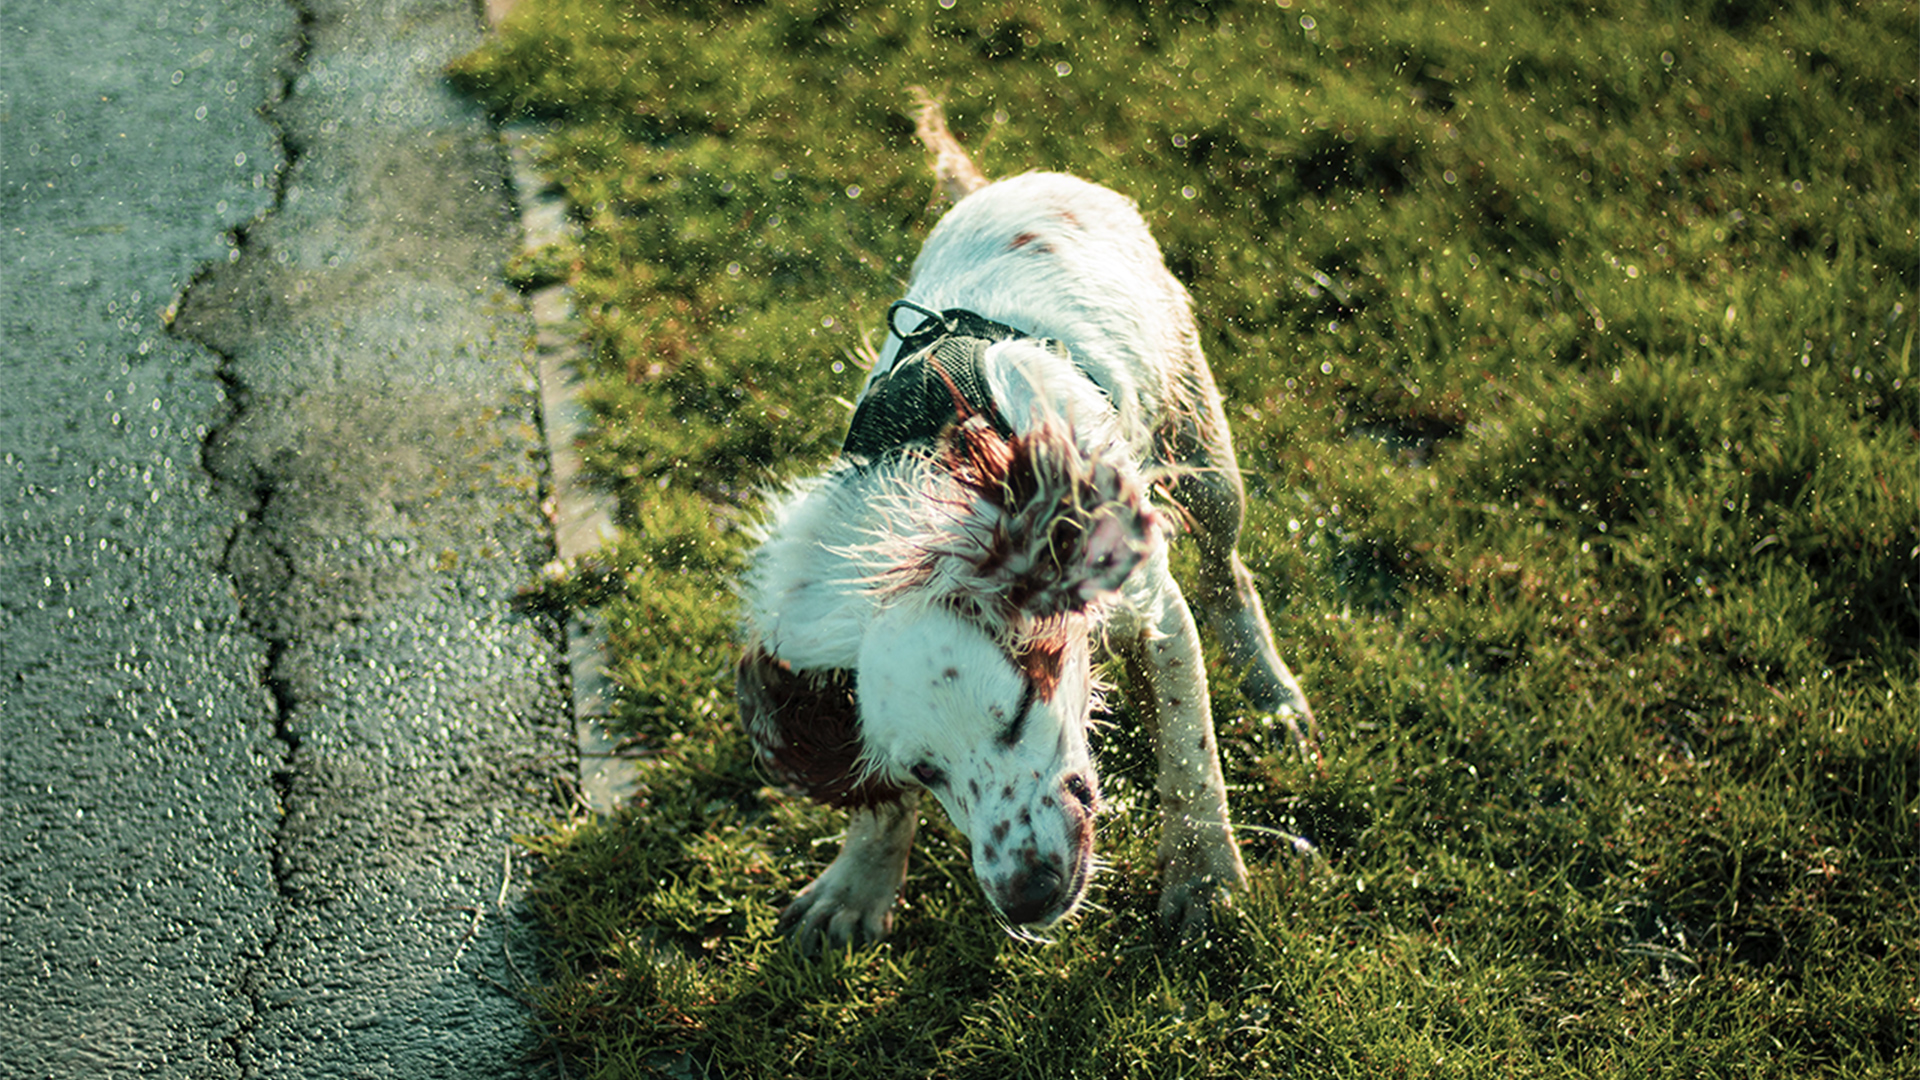 A wet white and brown dog standing on the grass shaking themselves dry.